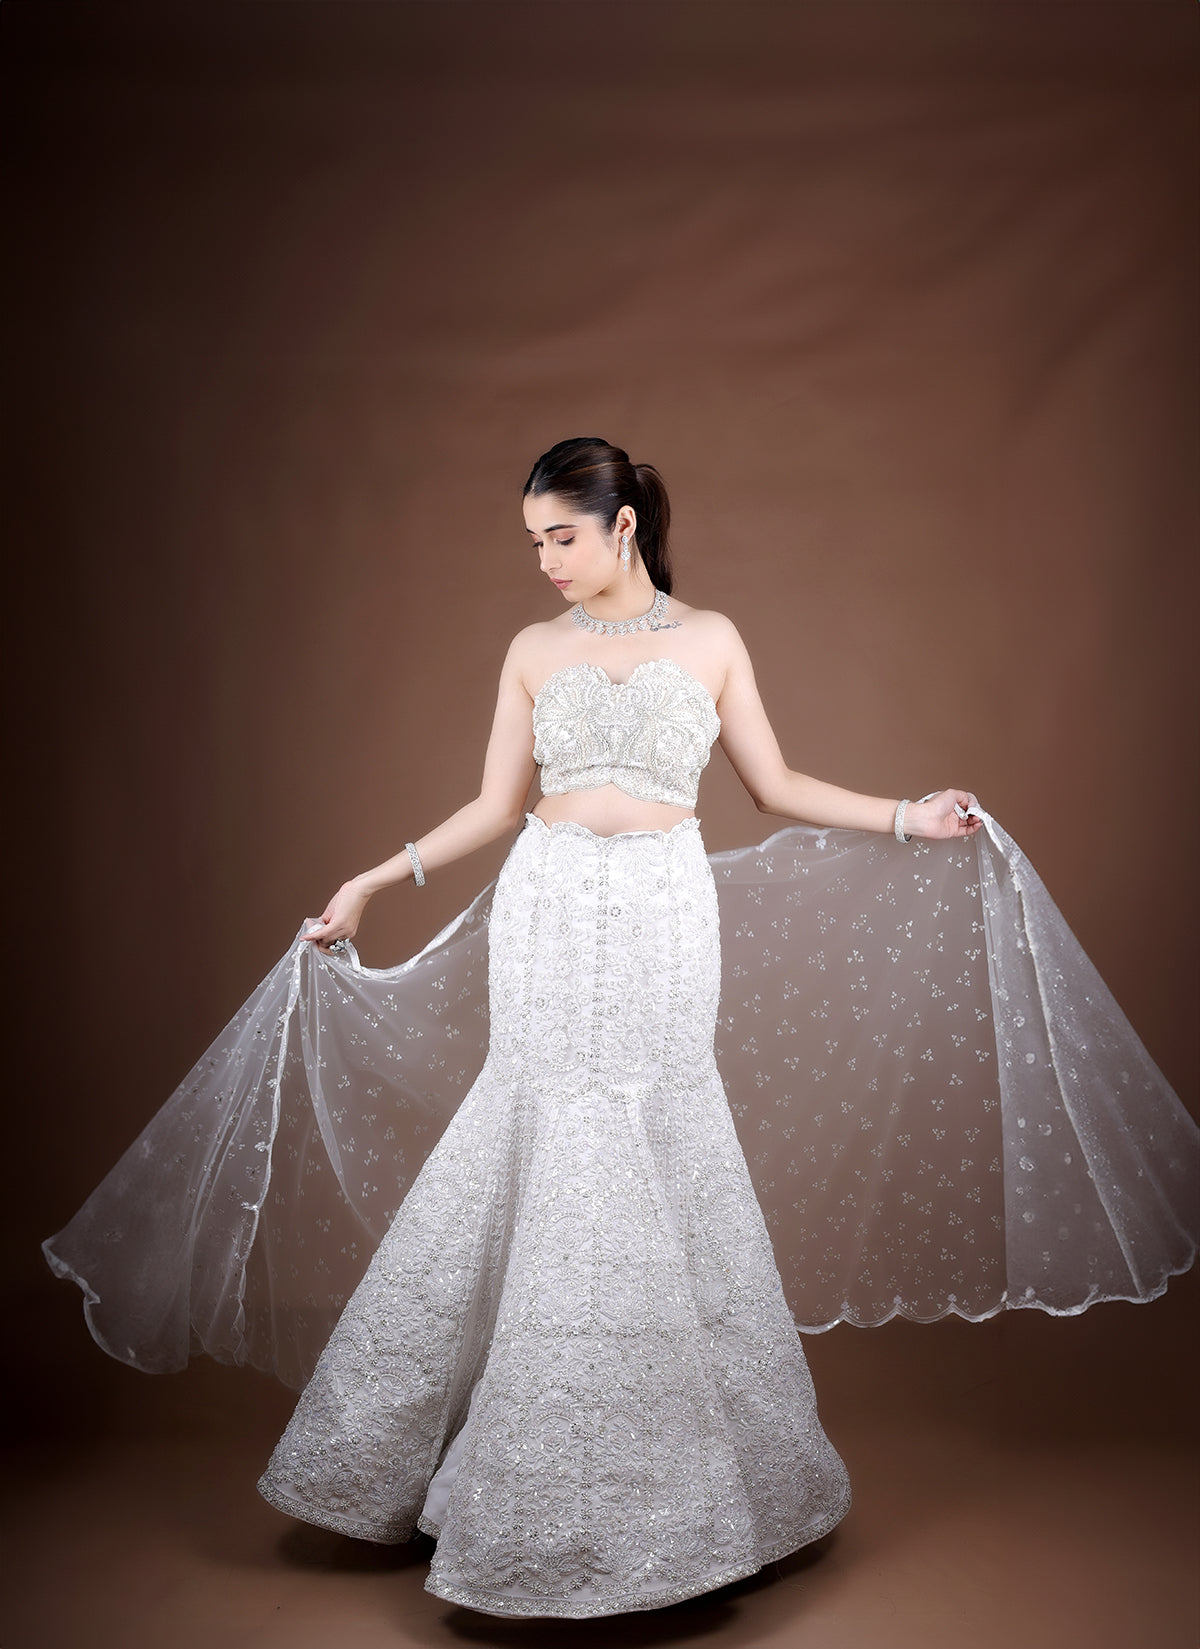 Off White Fish-Cut Lehenga with off shoulder Blouse